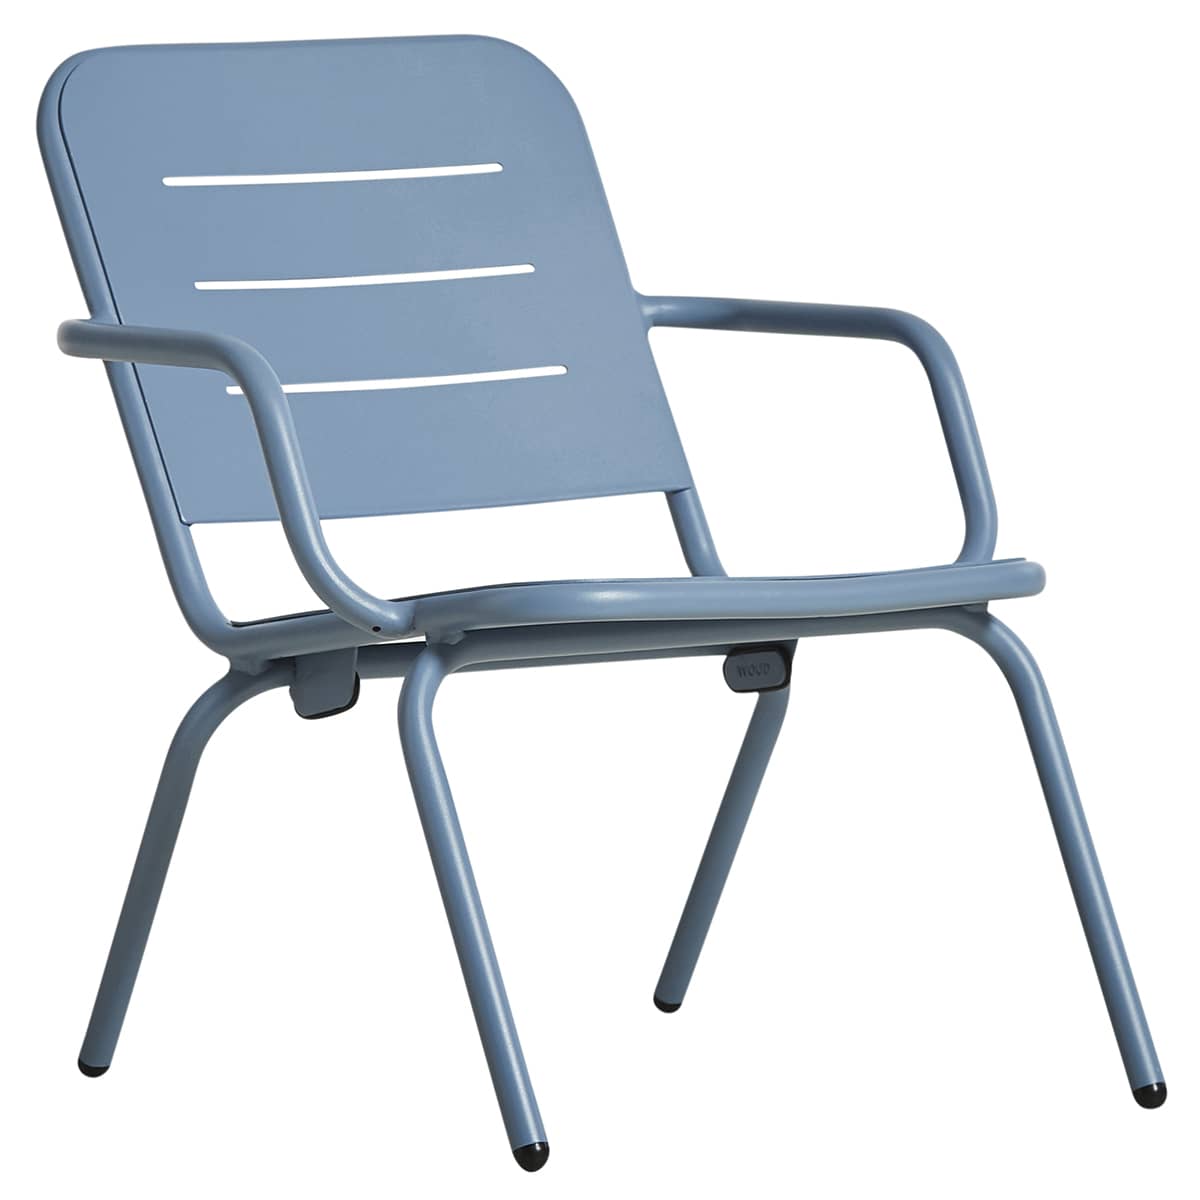 Chaise longue outdoor RAY, par FASTING & ROLFF pour WOUD